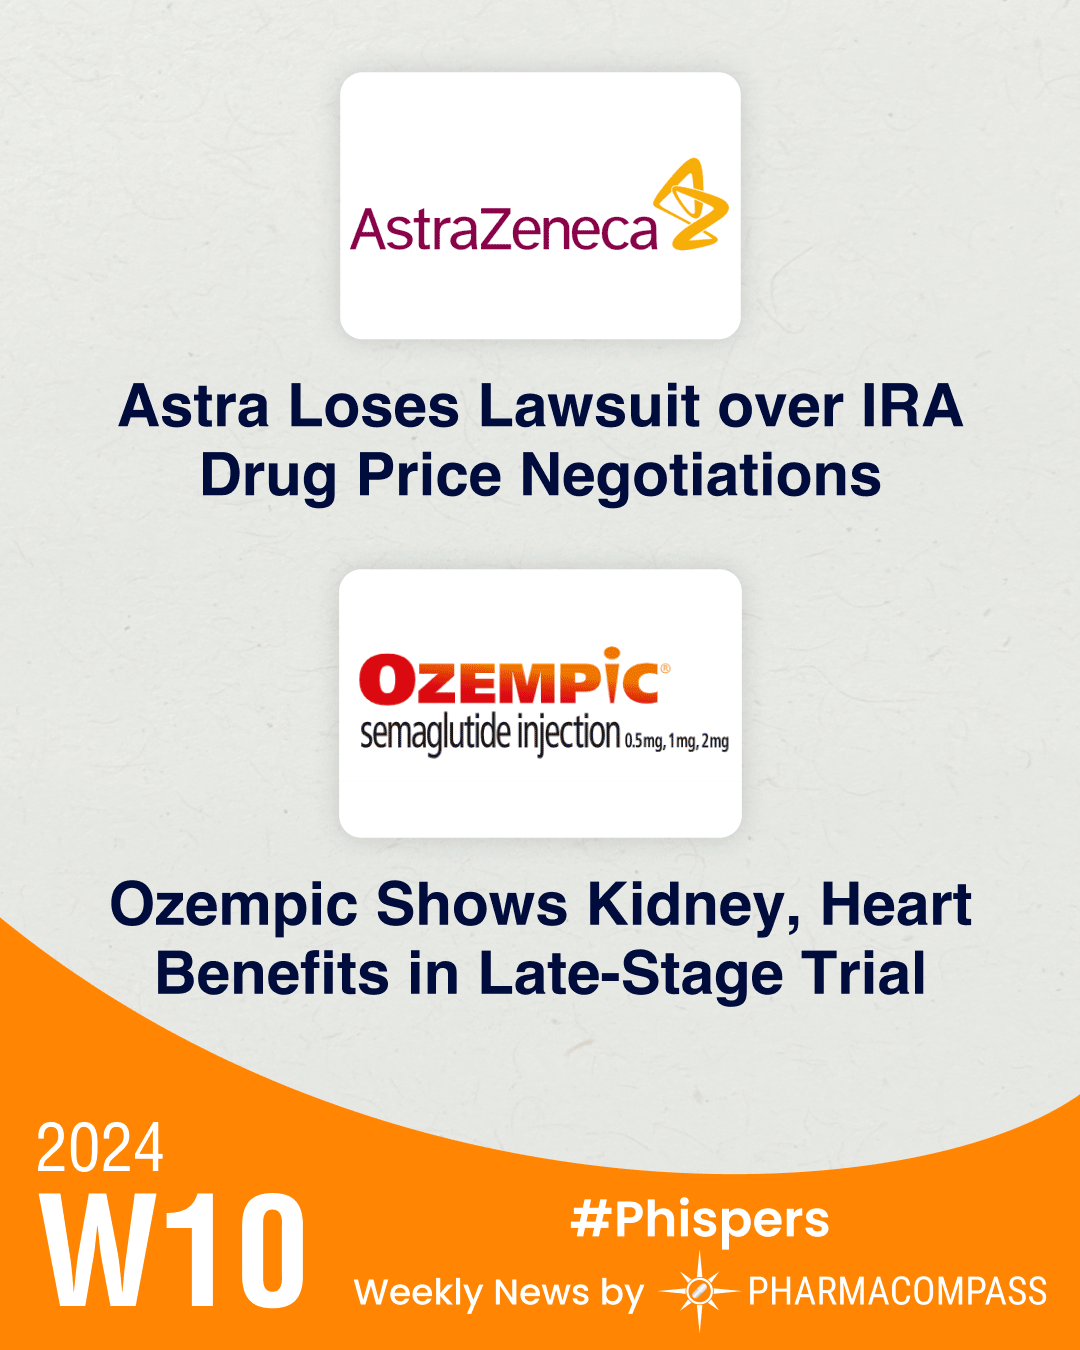 Court dismisses Astra’s lawsuit over IRA price talks; Ozempic shows benefits to kidney, heart in diabetics with CKD